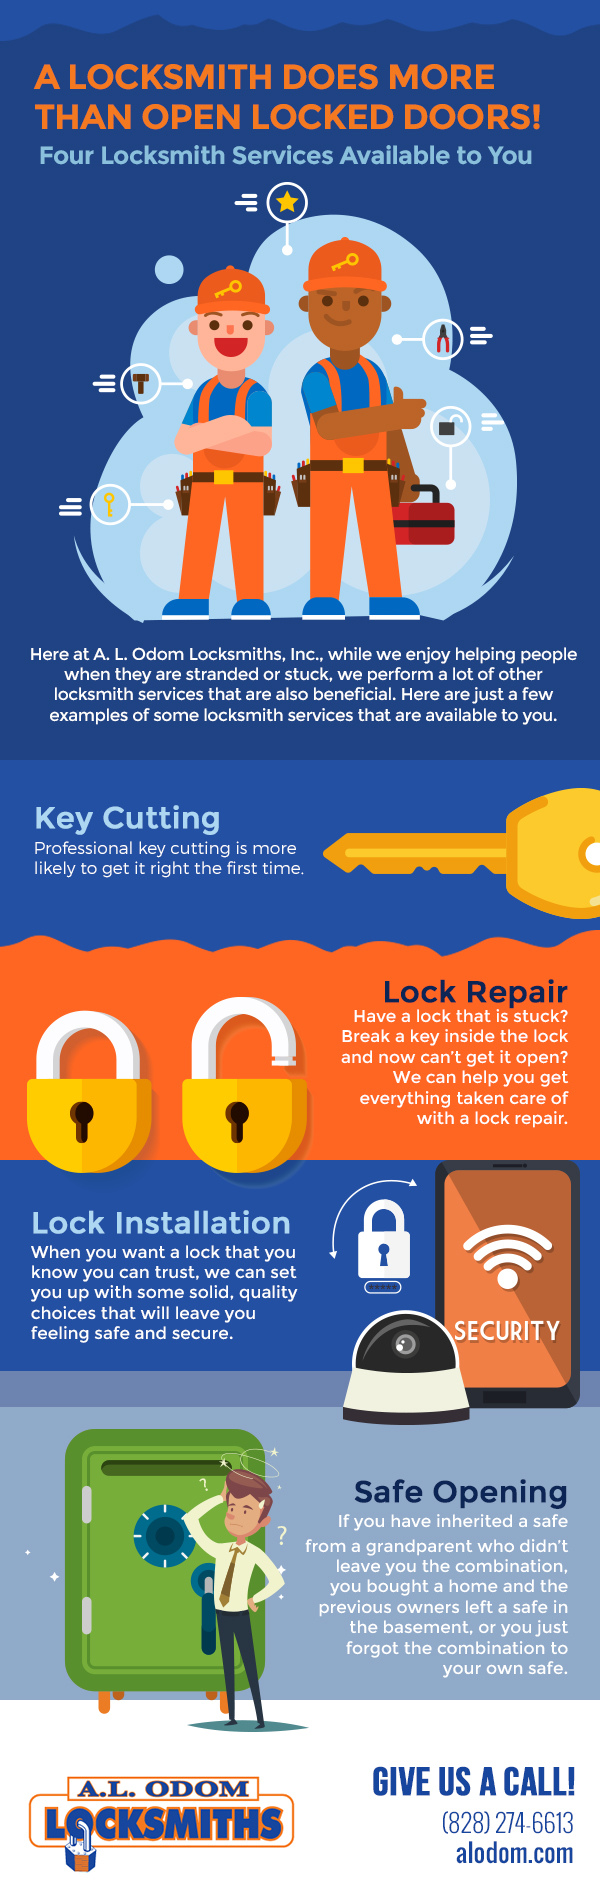 A Locksmith Does More than Open Locked Doors! Four Locksmith Services Available to You